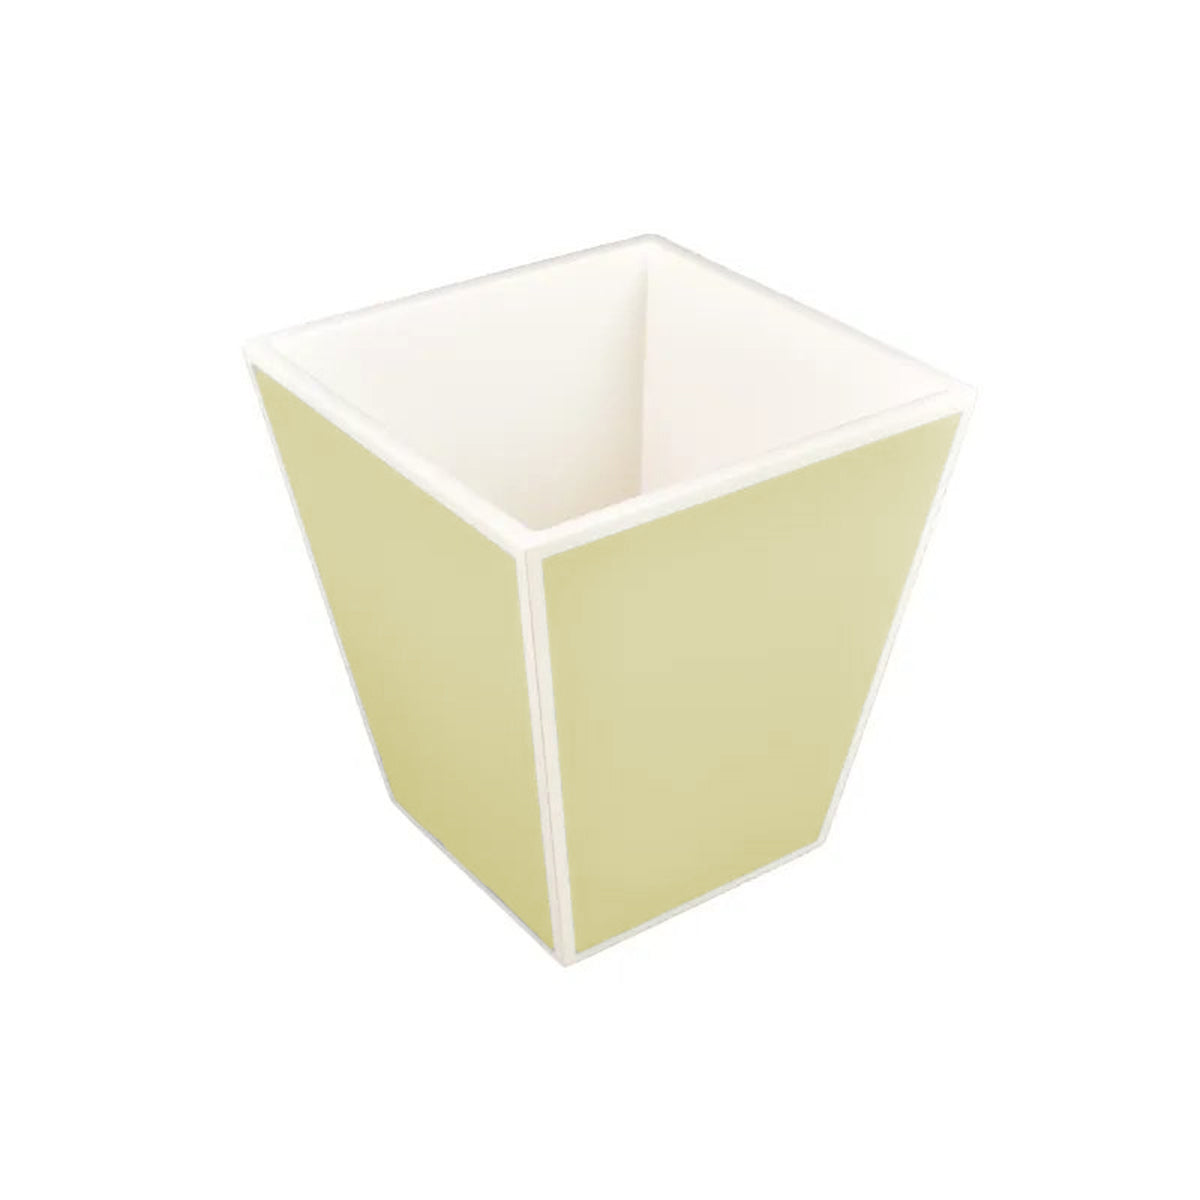 Pacific Connections Taupe & White Waste Basket